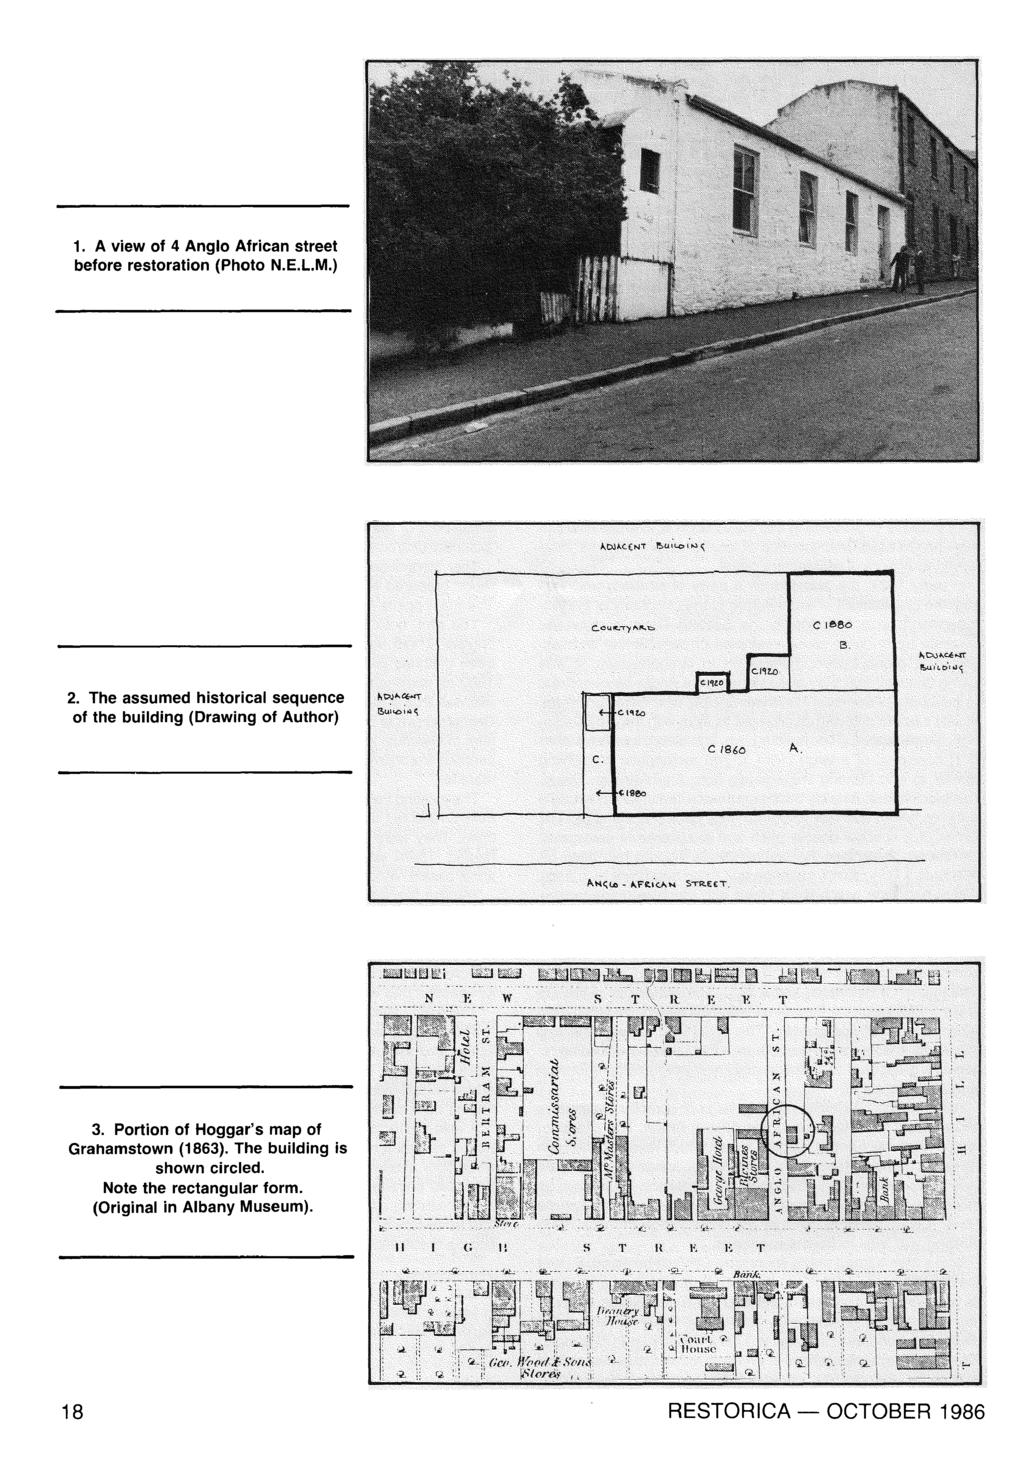 1. A view of 4 Anglo African street before restoration (Photo N.E.L.M.) 2. The assumed historical sequence of the building (Drawing of Author) 3.